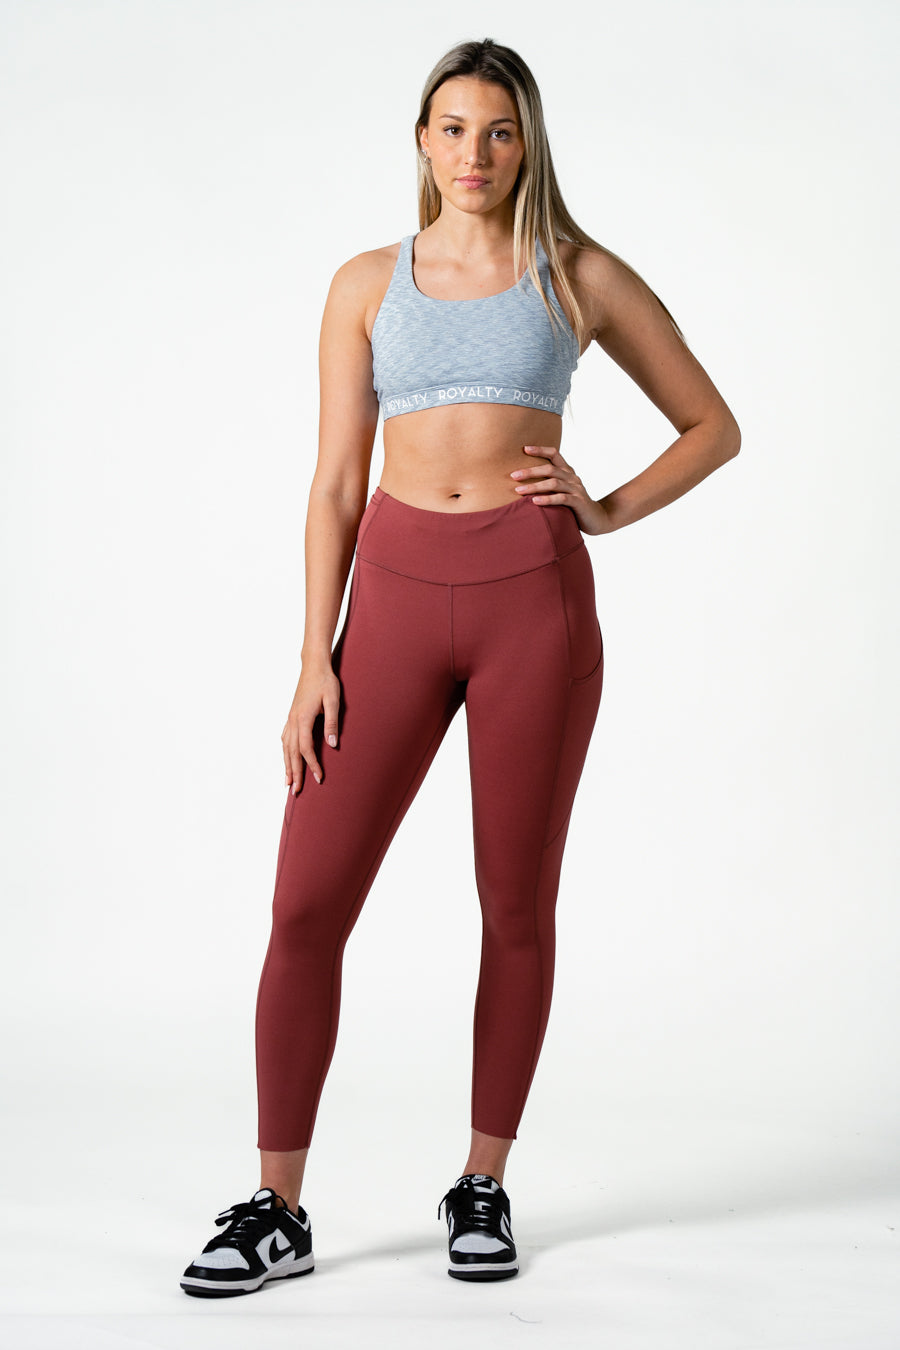 maroon lululemon leggings - Google Search  Clothes, Workout attire,  Athletic outfits